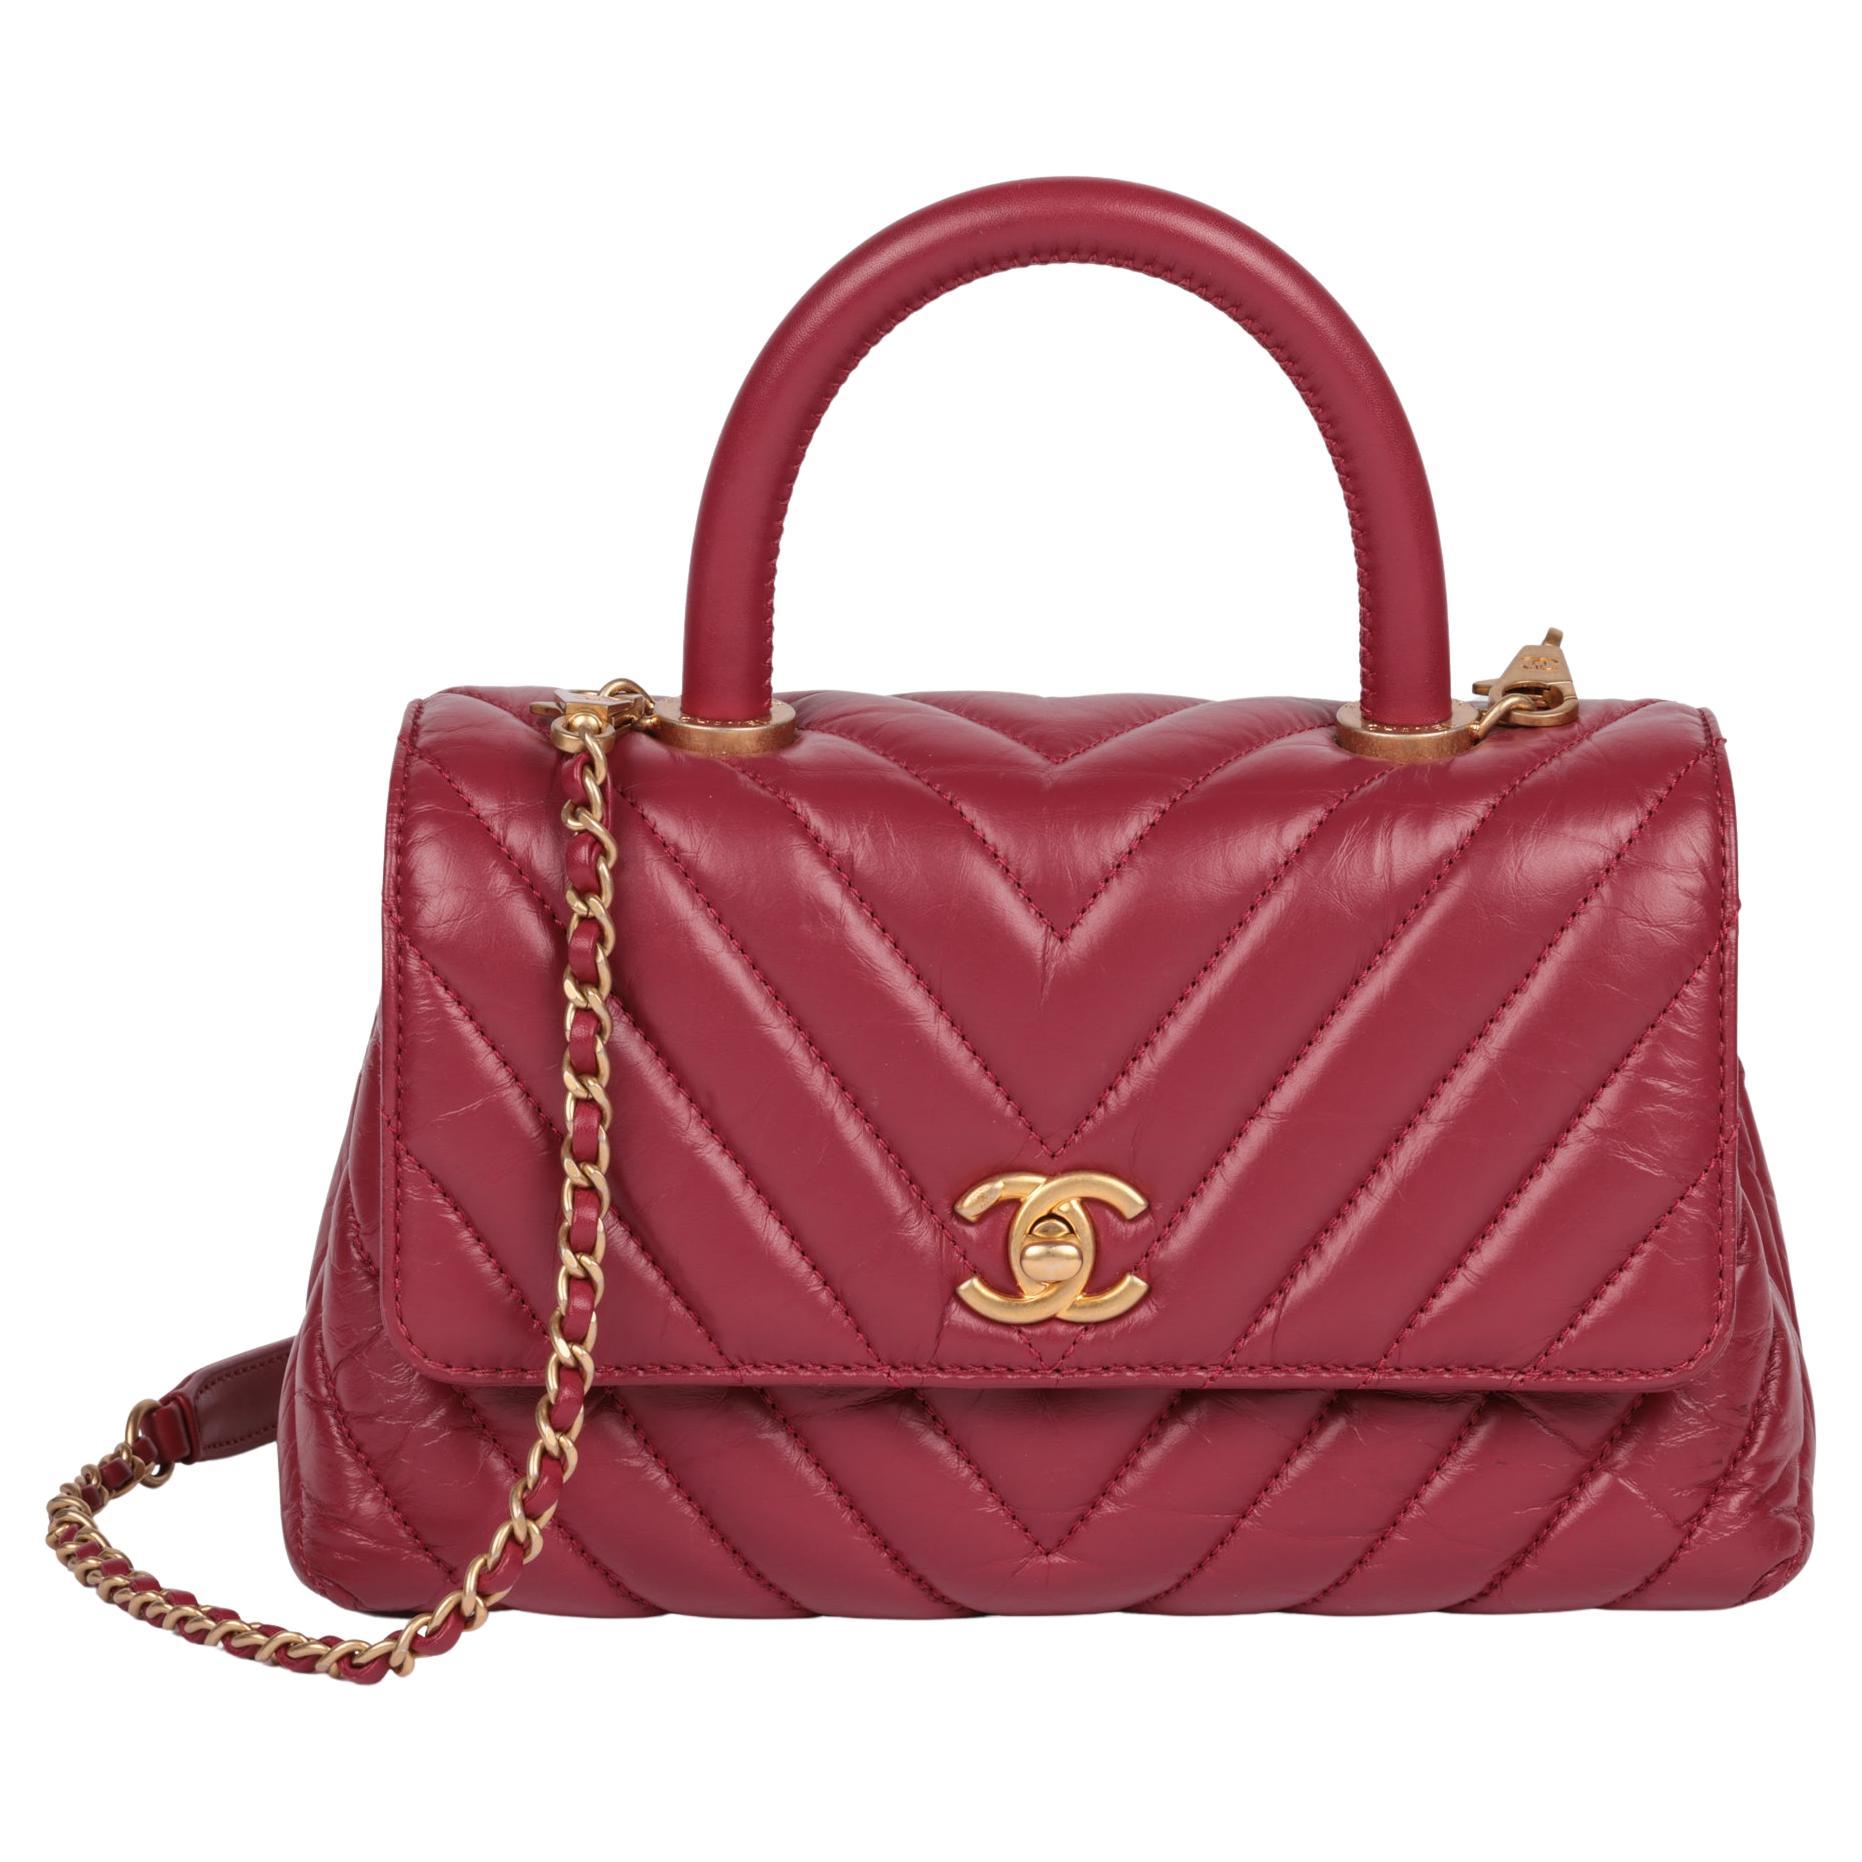 Chanel Red Chevron Aged Calfskin Leather Small Coco Top Handle For Sale